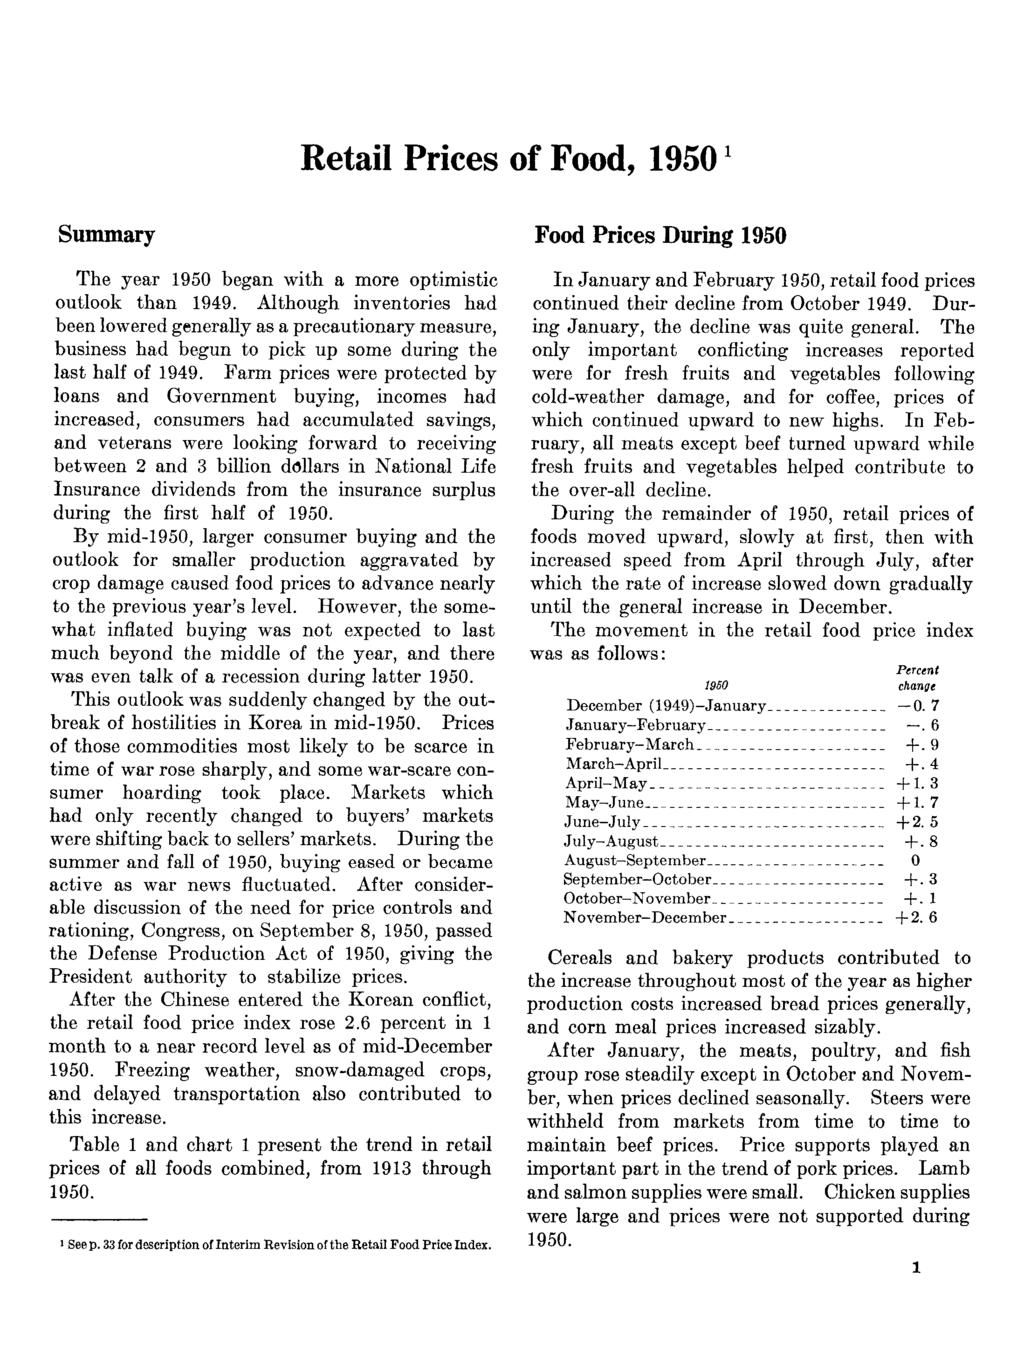 Retail Prices of Food, 19501 Summary The year 1950 began with a more optimistic outlook than 1949.